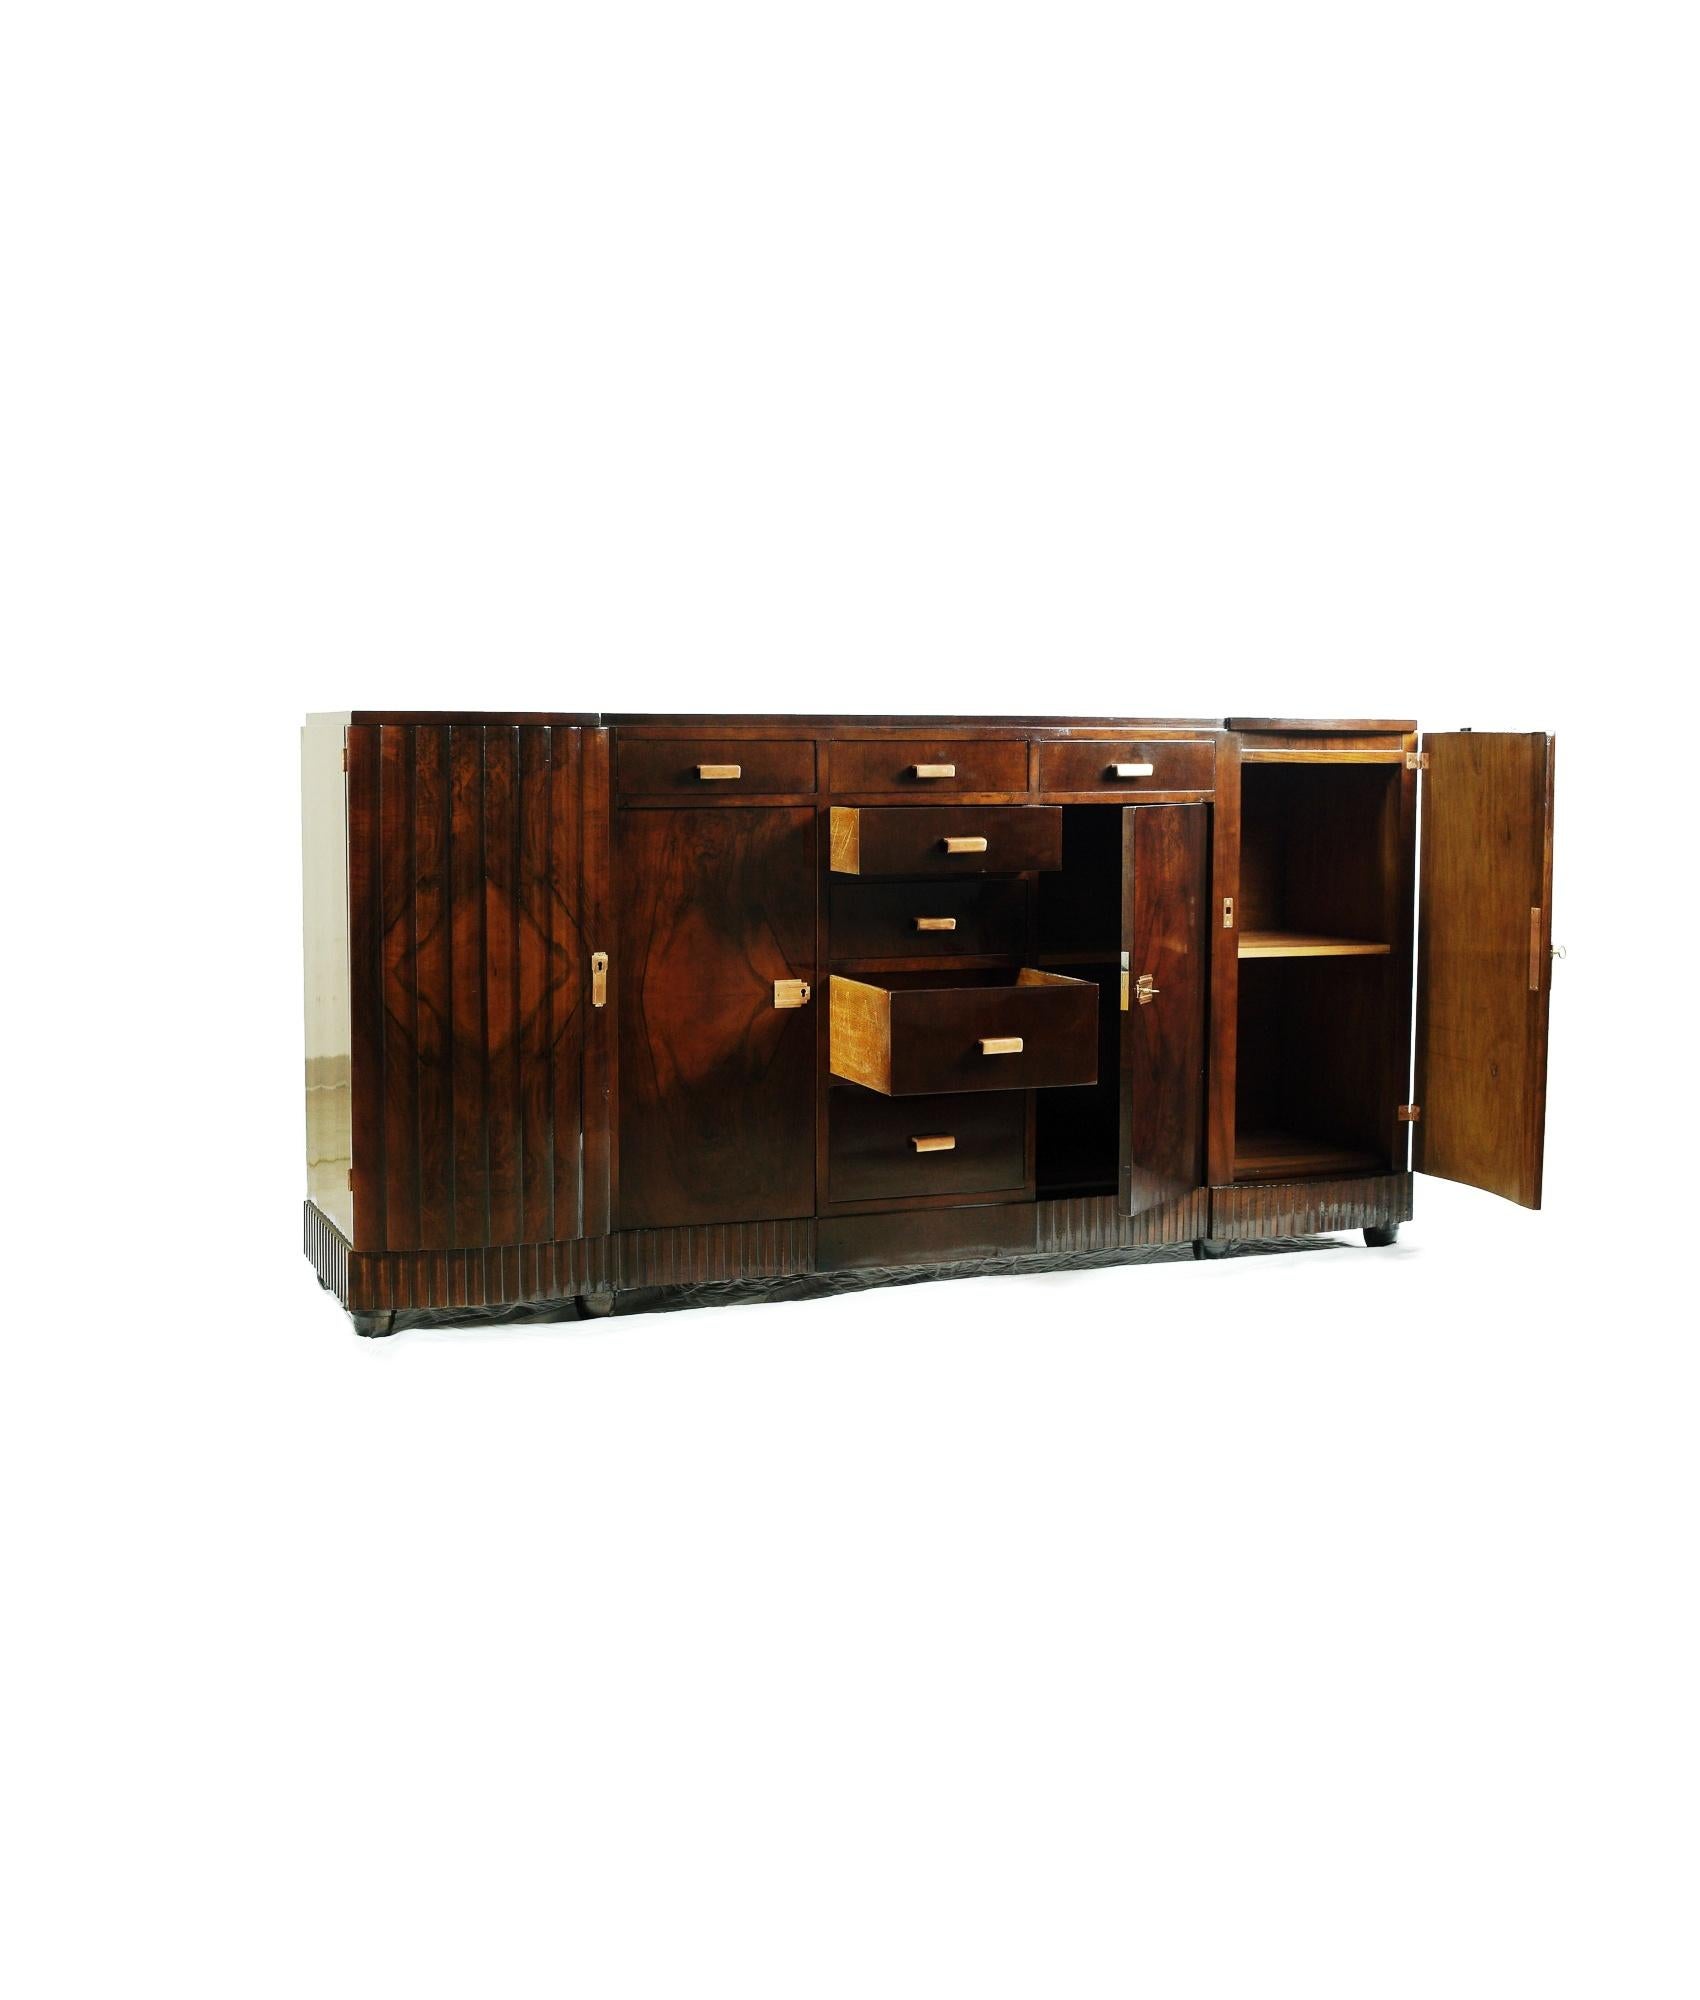 A alluring walnut sideboard, from a single tree veneer, with copper plated
brass handles  and a skilful varnish to last the ages.
All interior sections are clean and finished with four doors, 5 central drawers plus another two side drawers. 
A mid